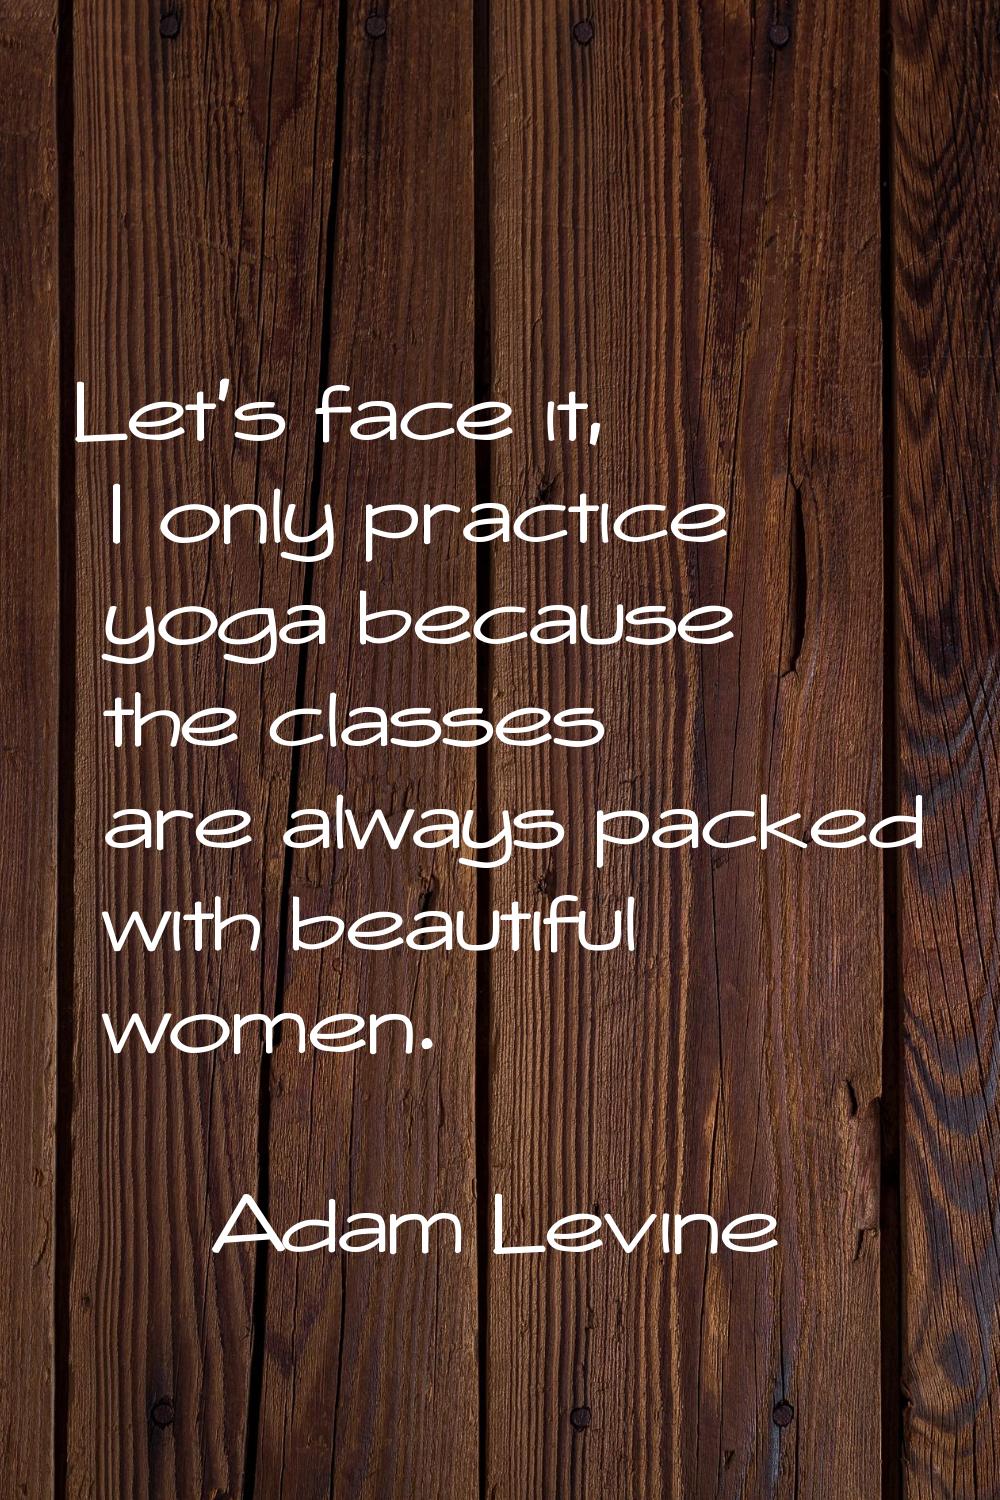 Let's face it, I only practice yoga because the classes are always packed with beautiful women.